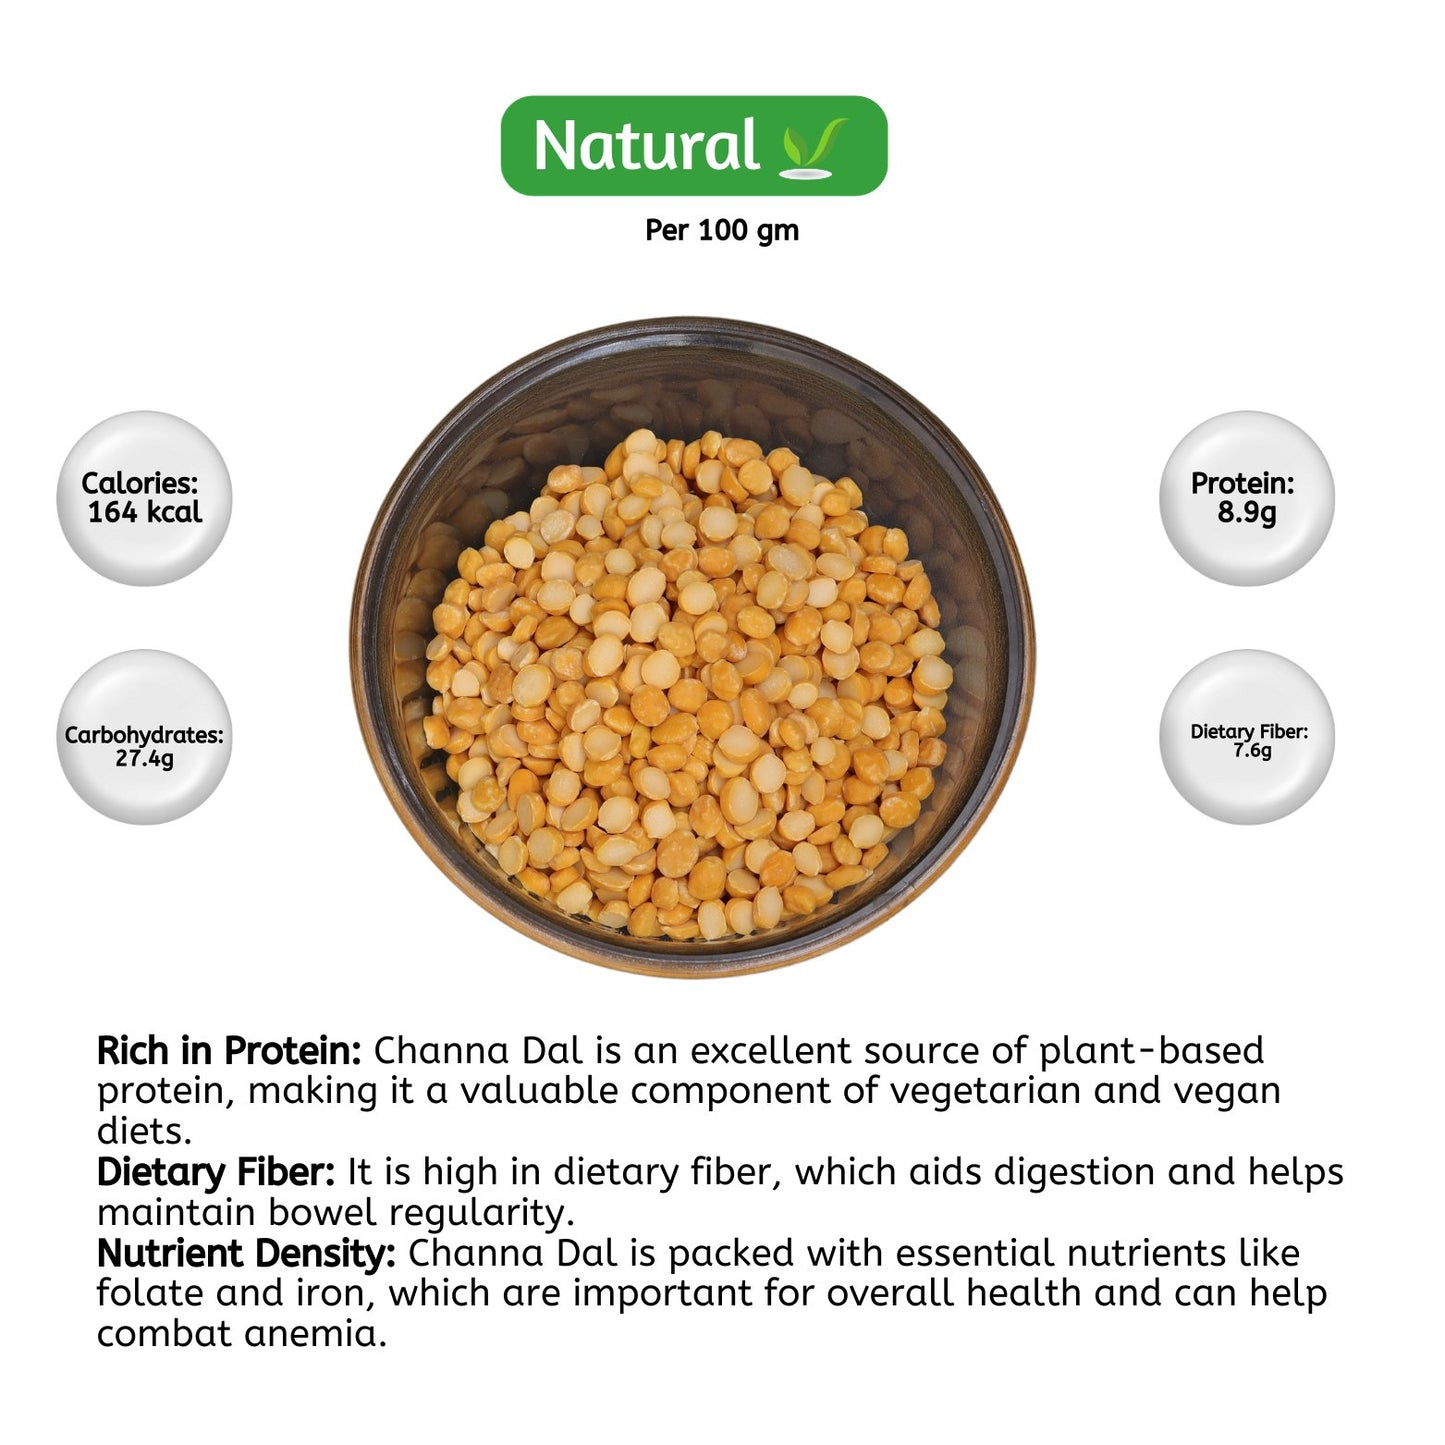 organic Chana Dal | split chickpeas | Bengal gram - Online store for organic products in Bangalore - Bengal gram | Chickpea